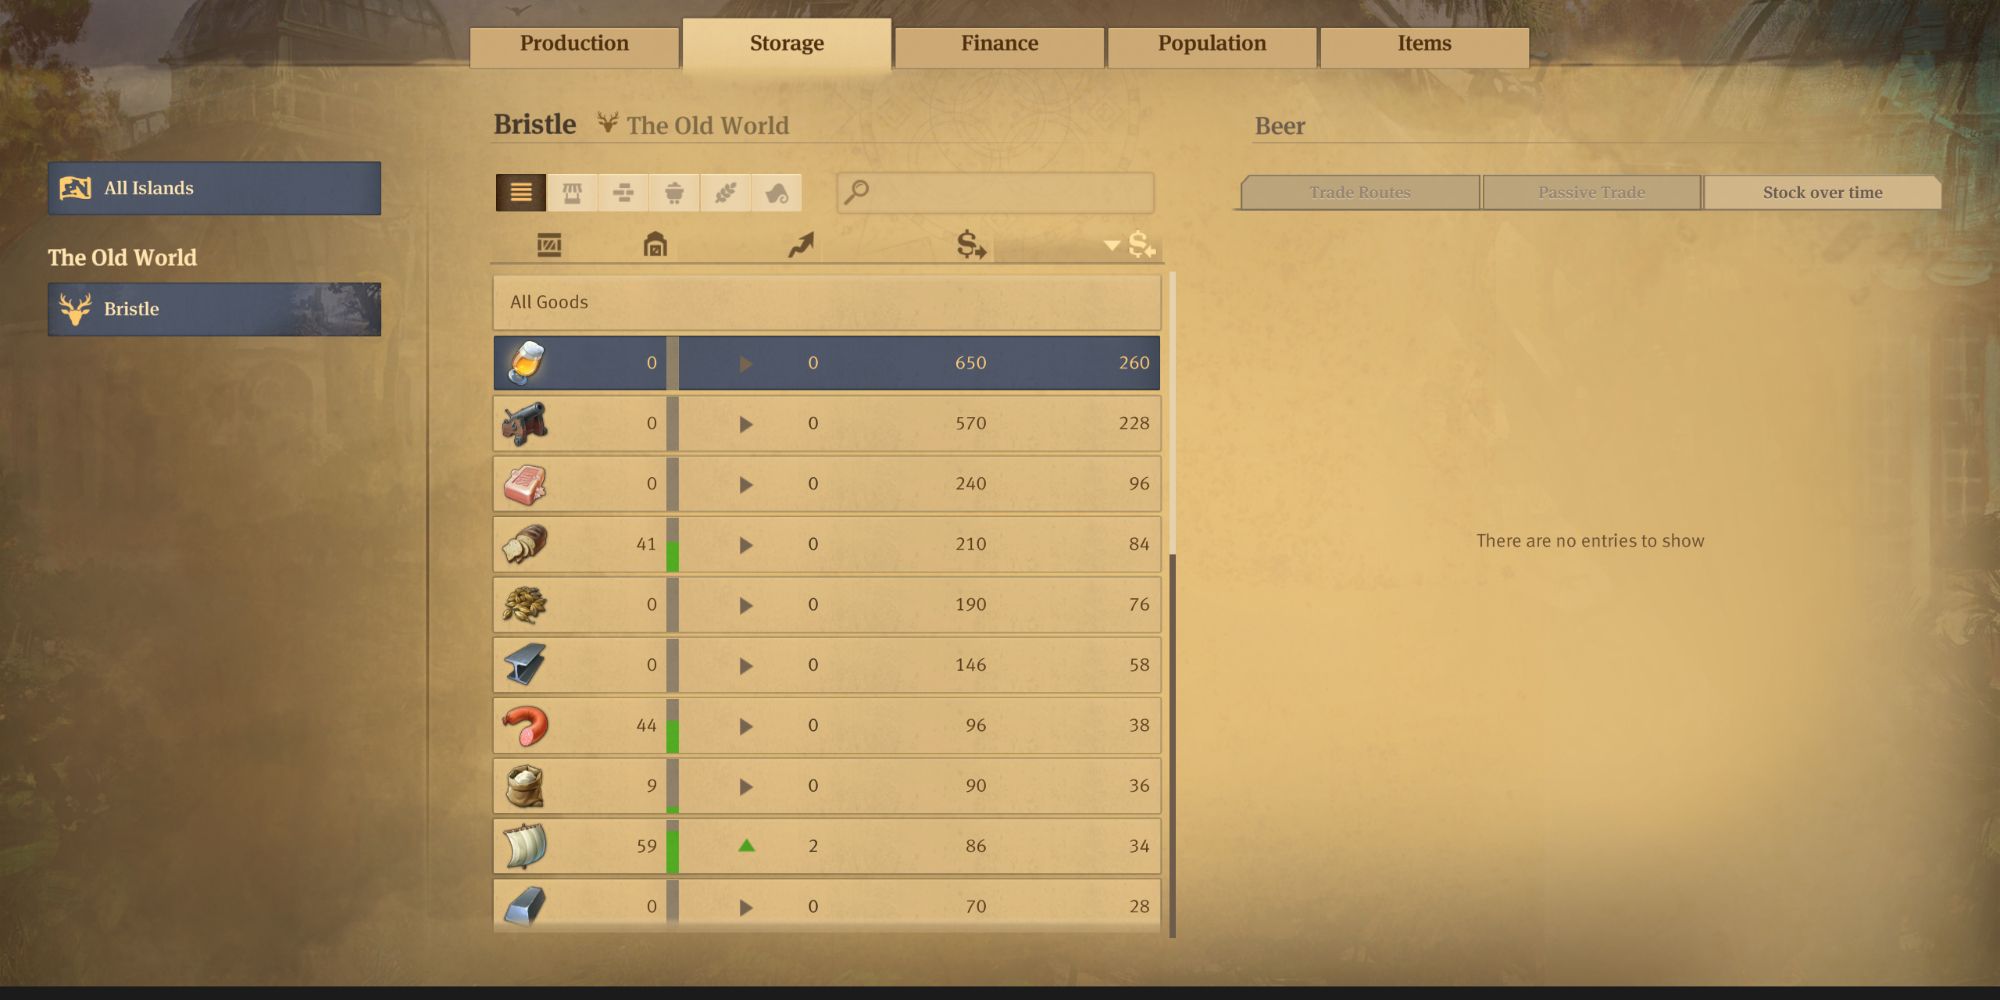 Storage UI showing all the available goods to sell by the player